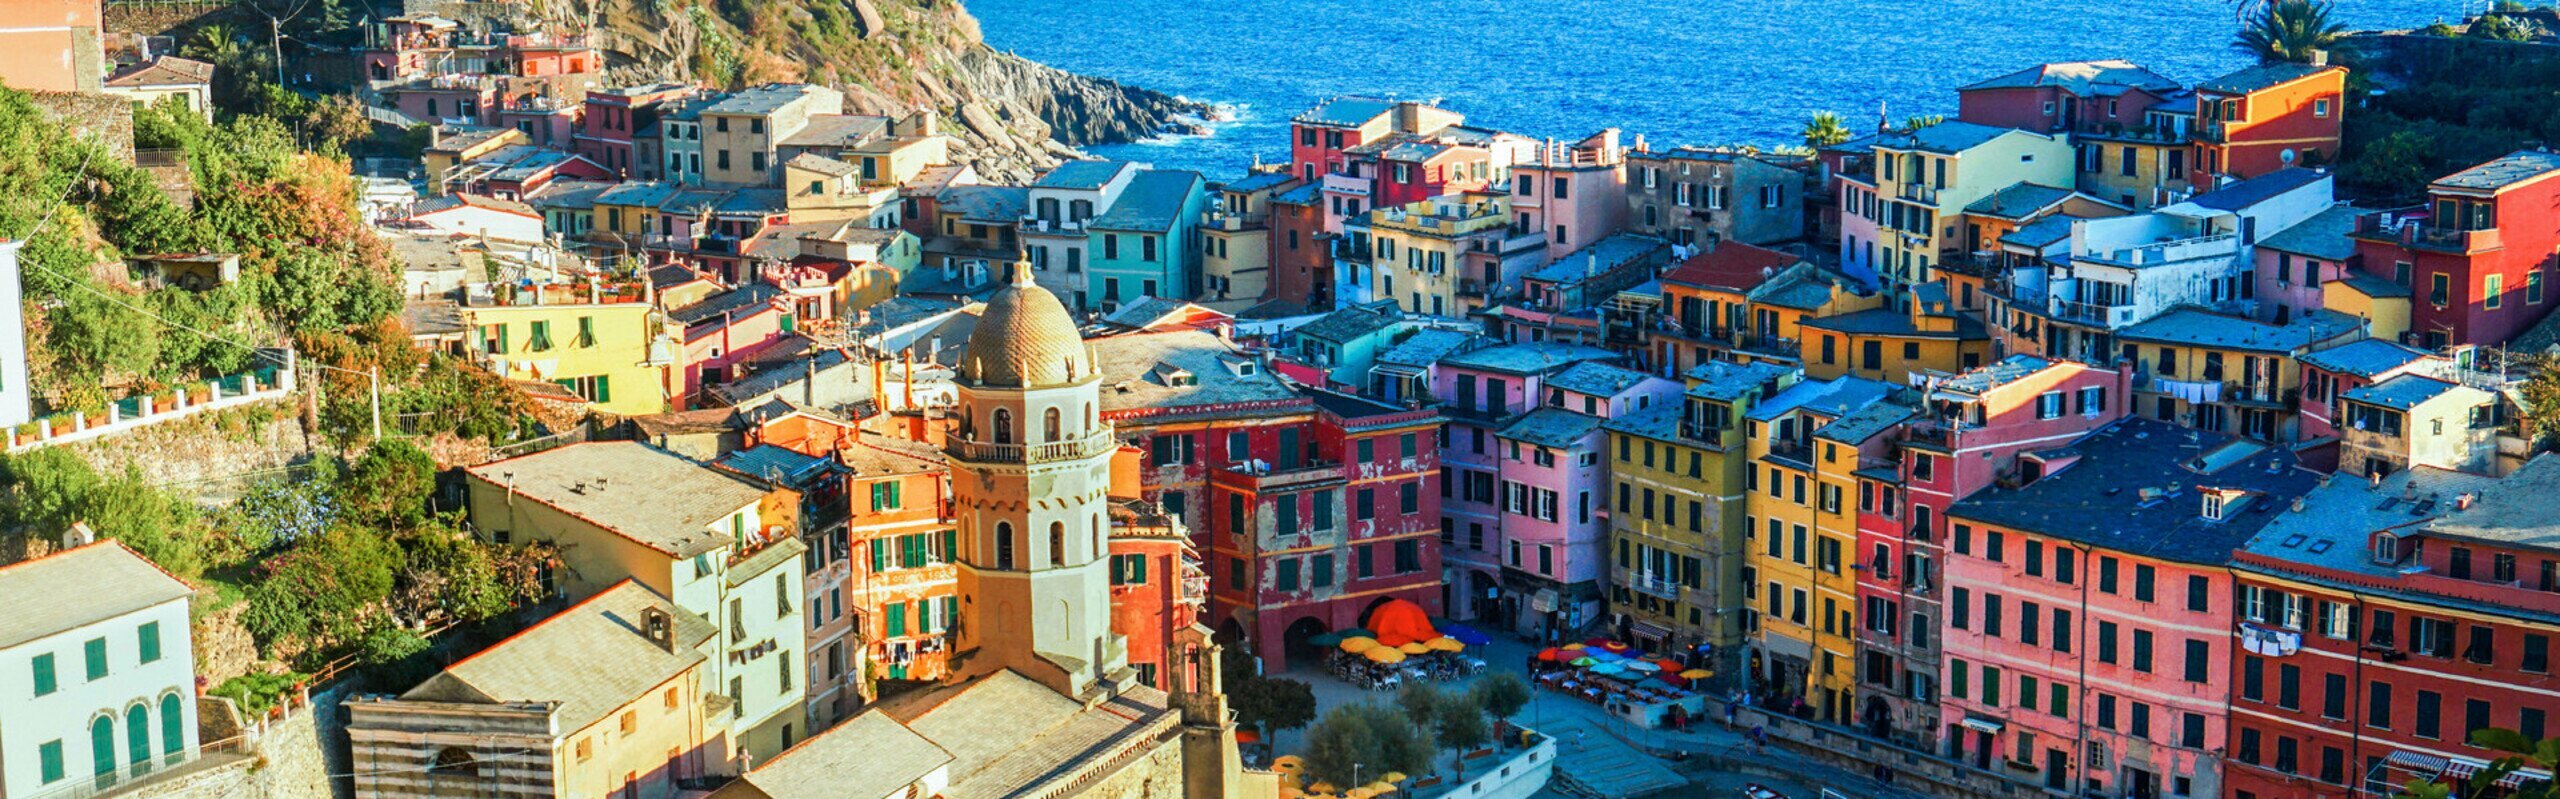 Italy Travel Guide: Customize a Personalized & Stress-free Trip